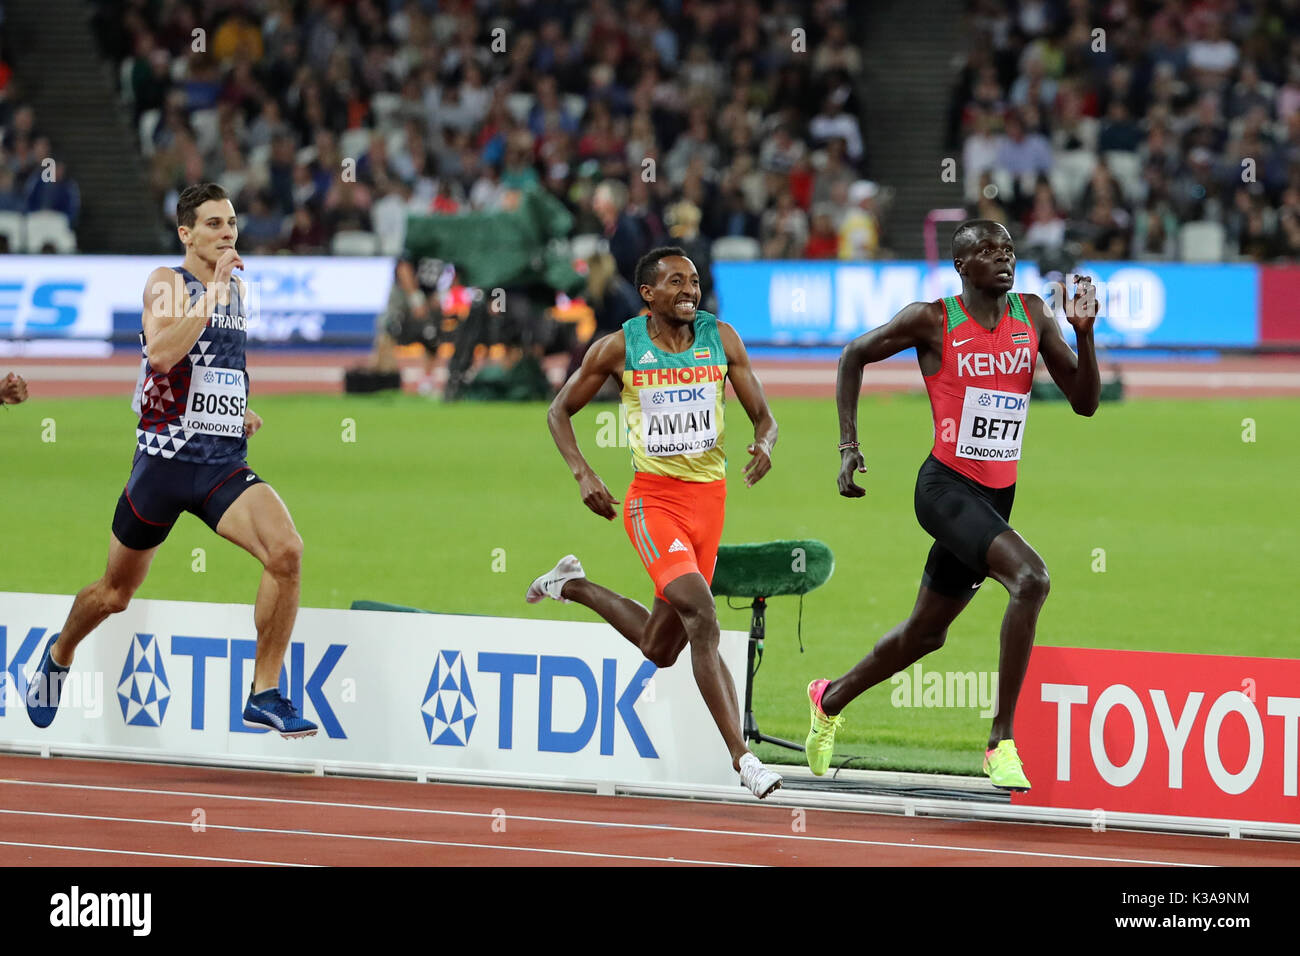 Mohammed AMAN (Ethiopia), Kipyegon BETT (Kenya), Pierre-Ambroise BOSSE (France) competing in the Men's 800m Semi-Final 3 at the 2017, IAAF World Championships, Queen Elizabeth Olympic Park, Stratford, London, UK. Stock Photo